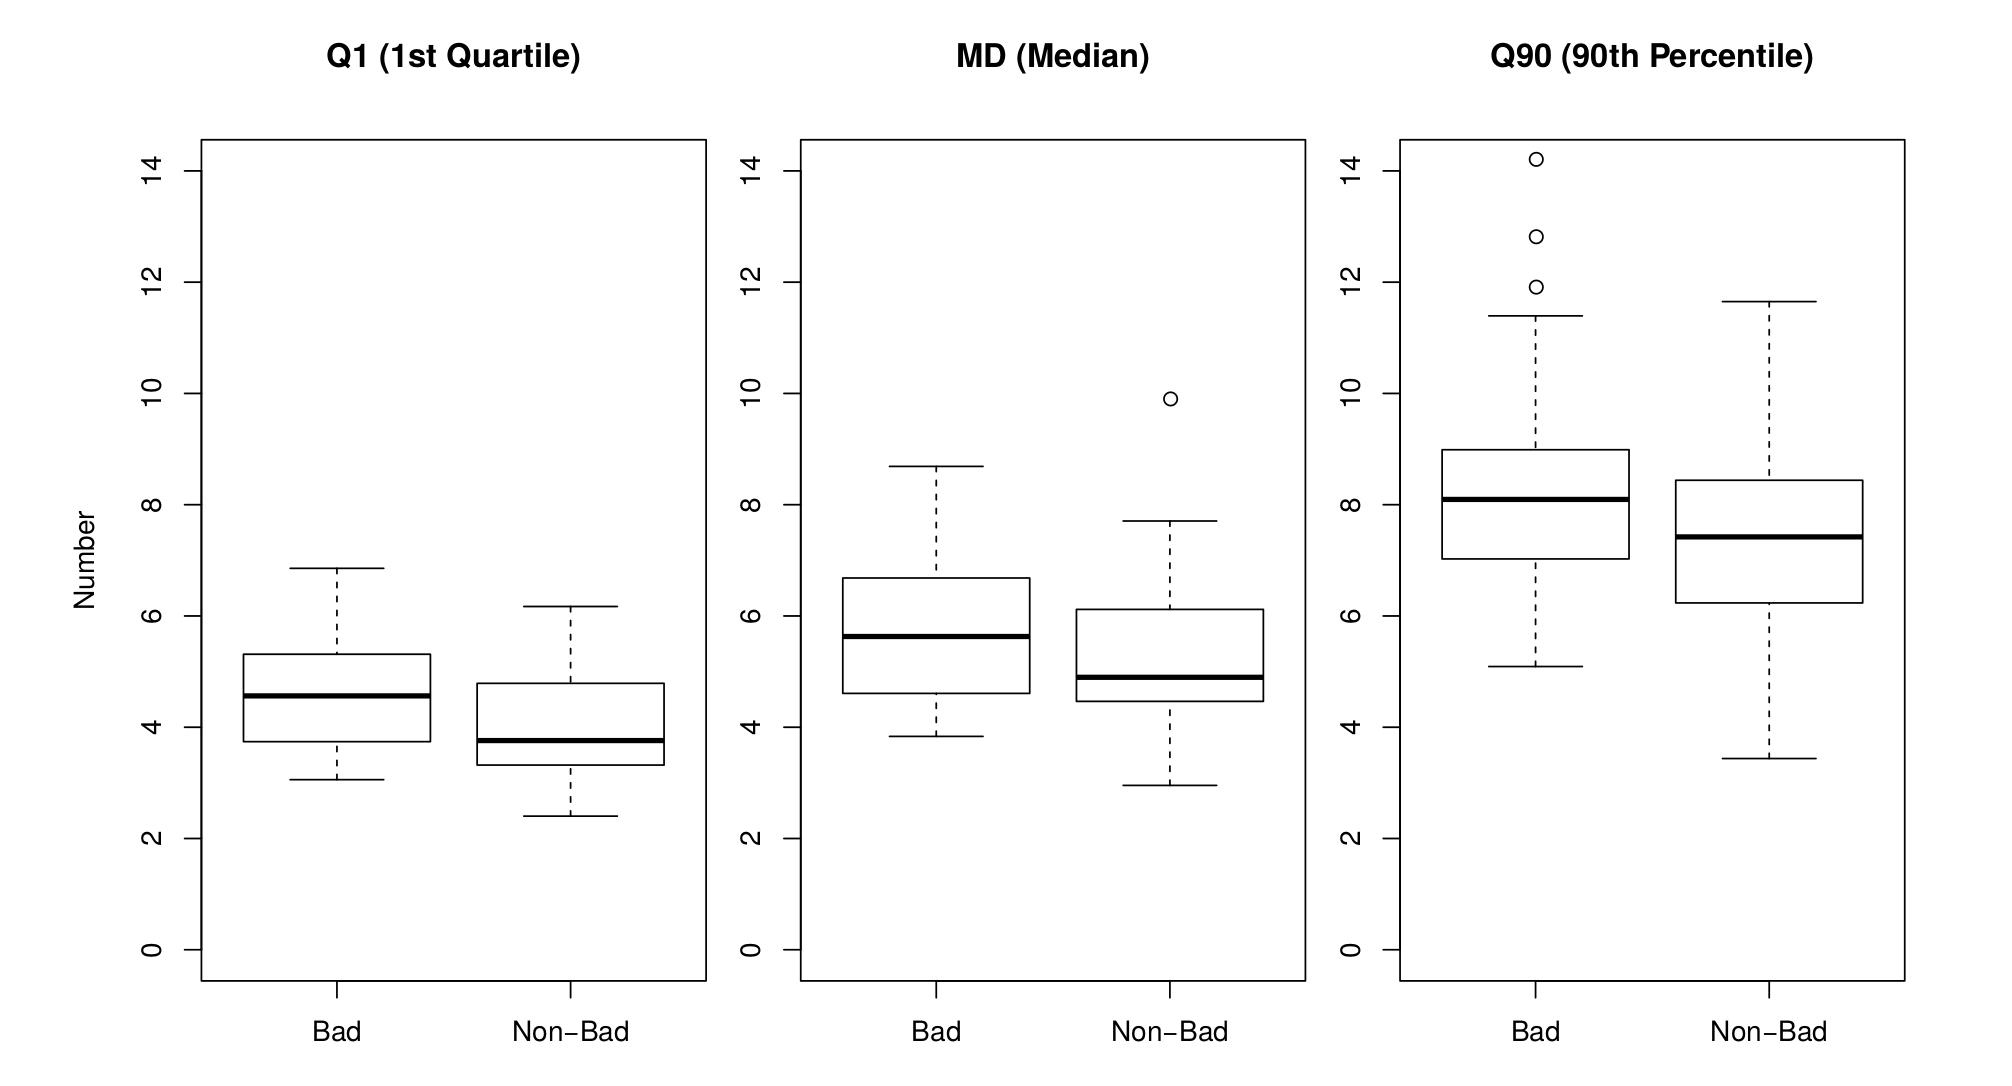 Location parameters of dBSPL among Q1, MD, and Q90, comparing Bad and Non-Bad Tremolo groups. More description above and below.